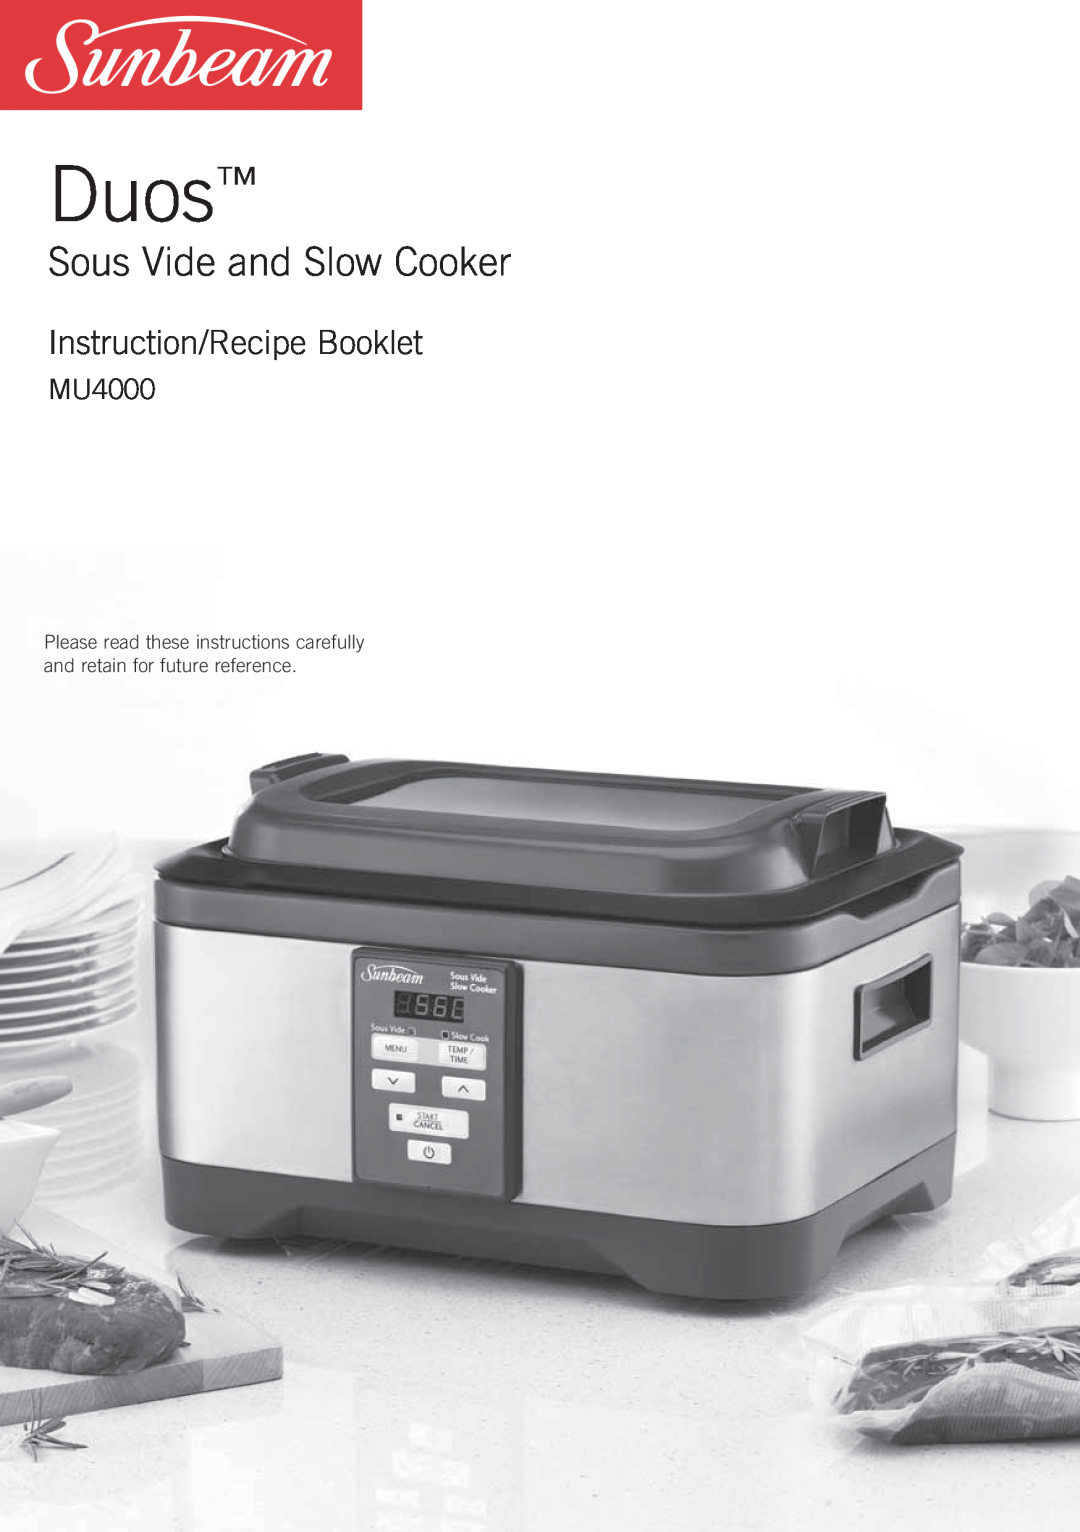 Sunbeam MU4000 manual Duos, Sous Vide and Slow Cooker, Instruction/Recipe Booklet 